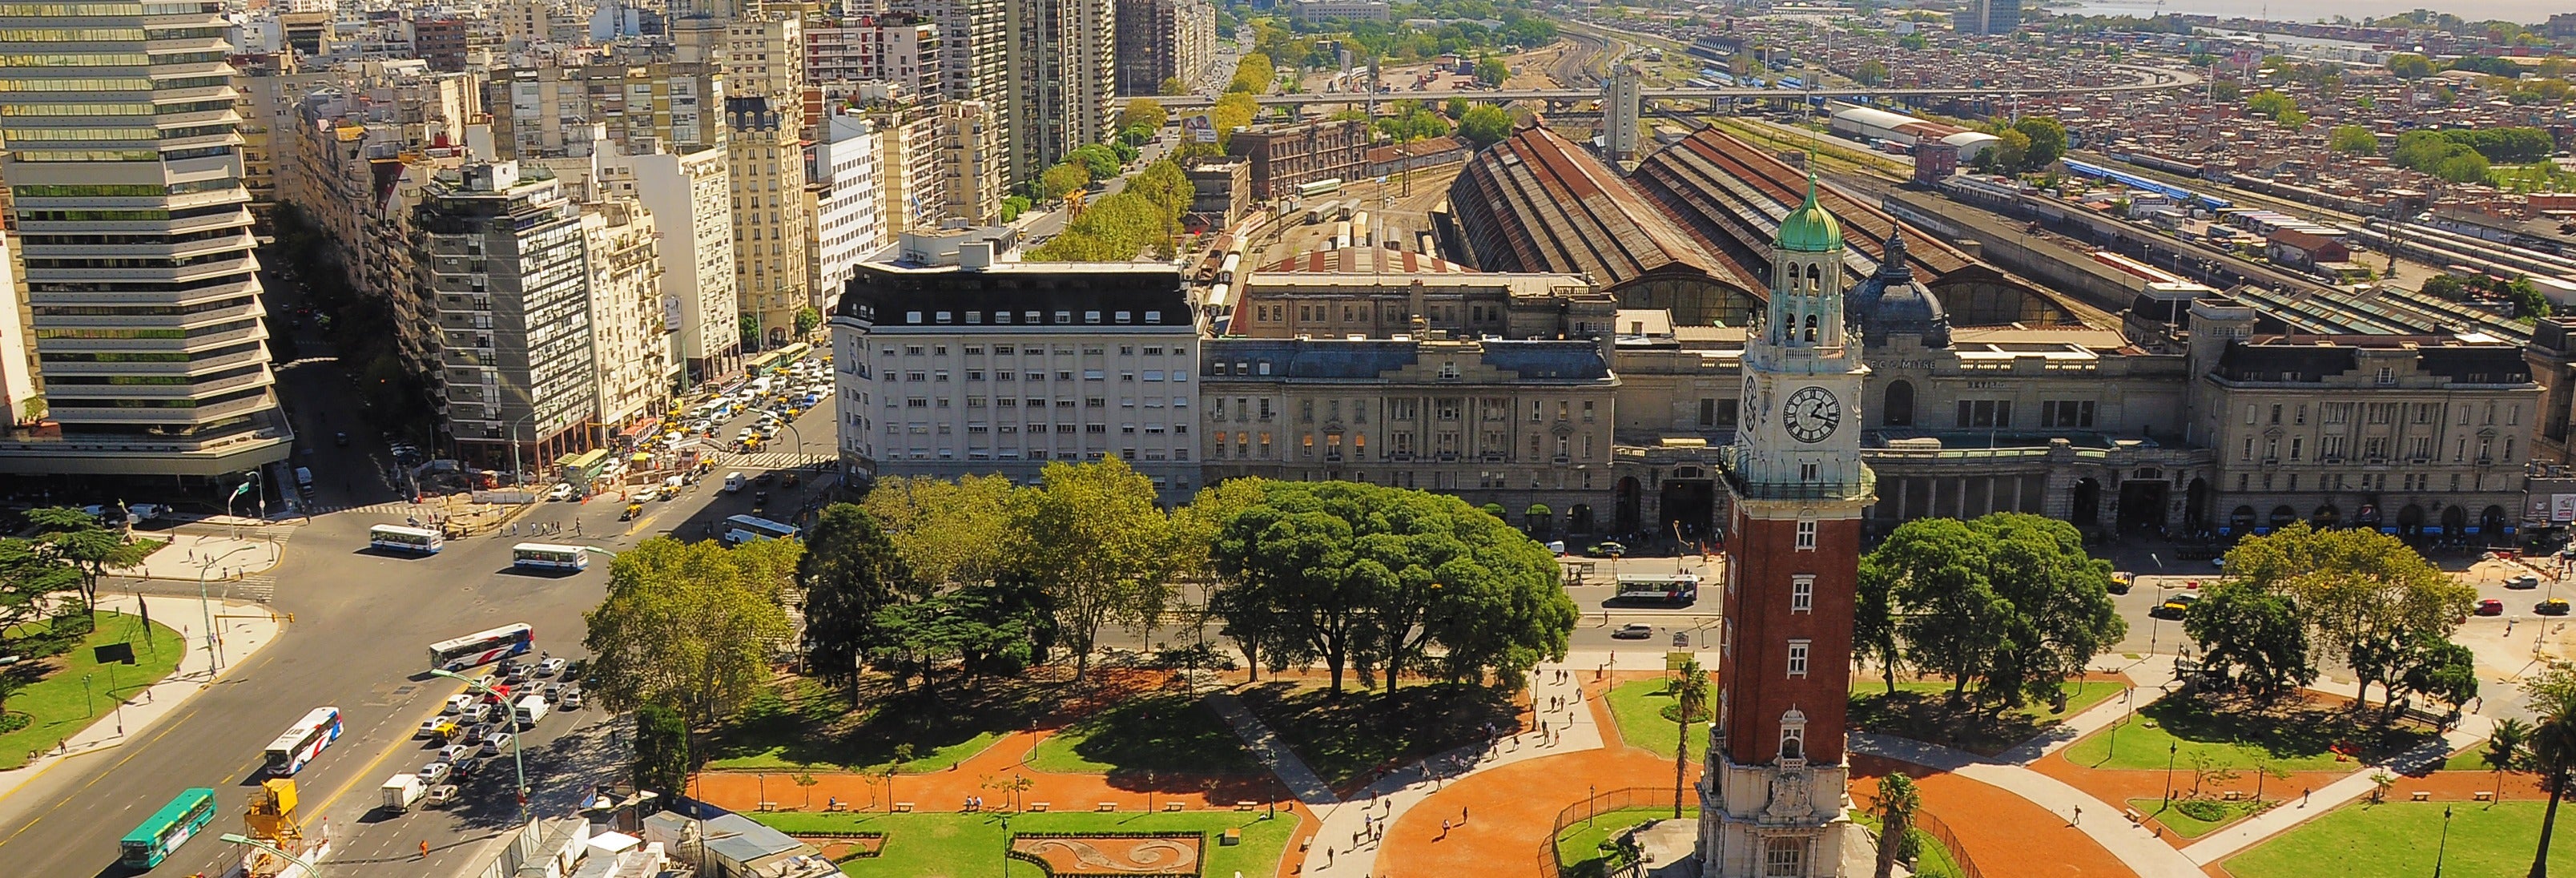 free guided walking tours buenos aires